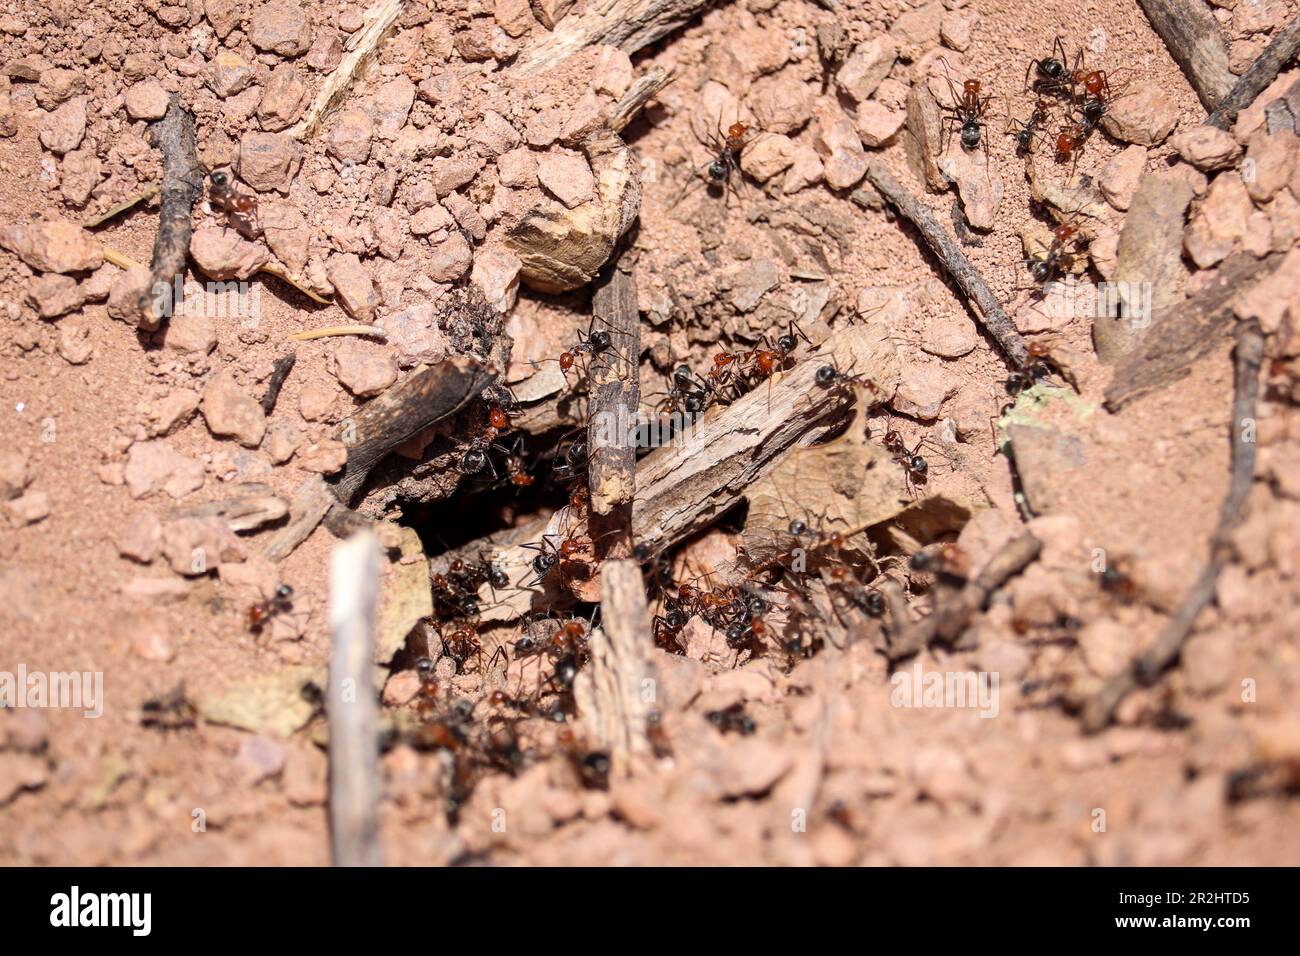 Close up of an ant or Formicinae hill opening at the Payson college trial in Arizona. Stock Photo